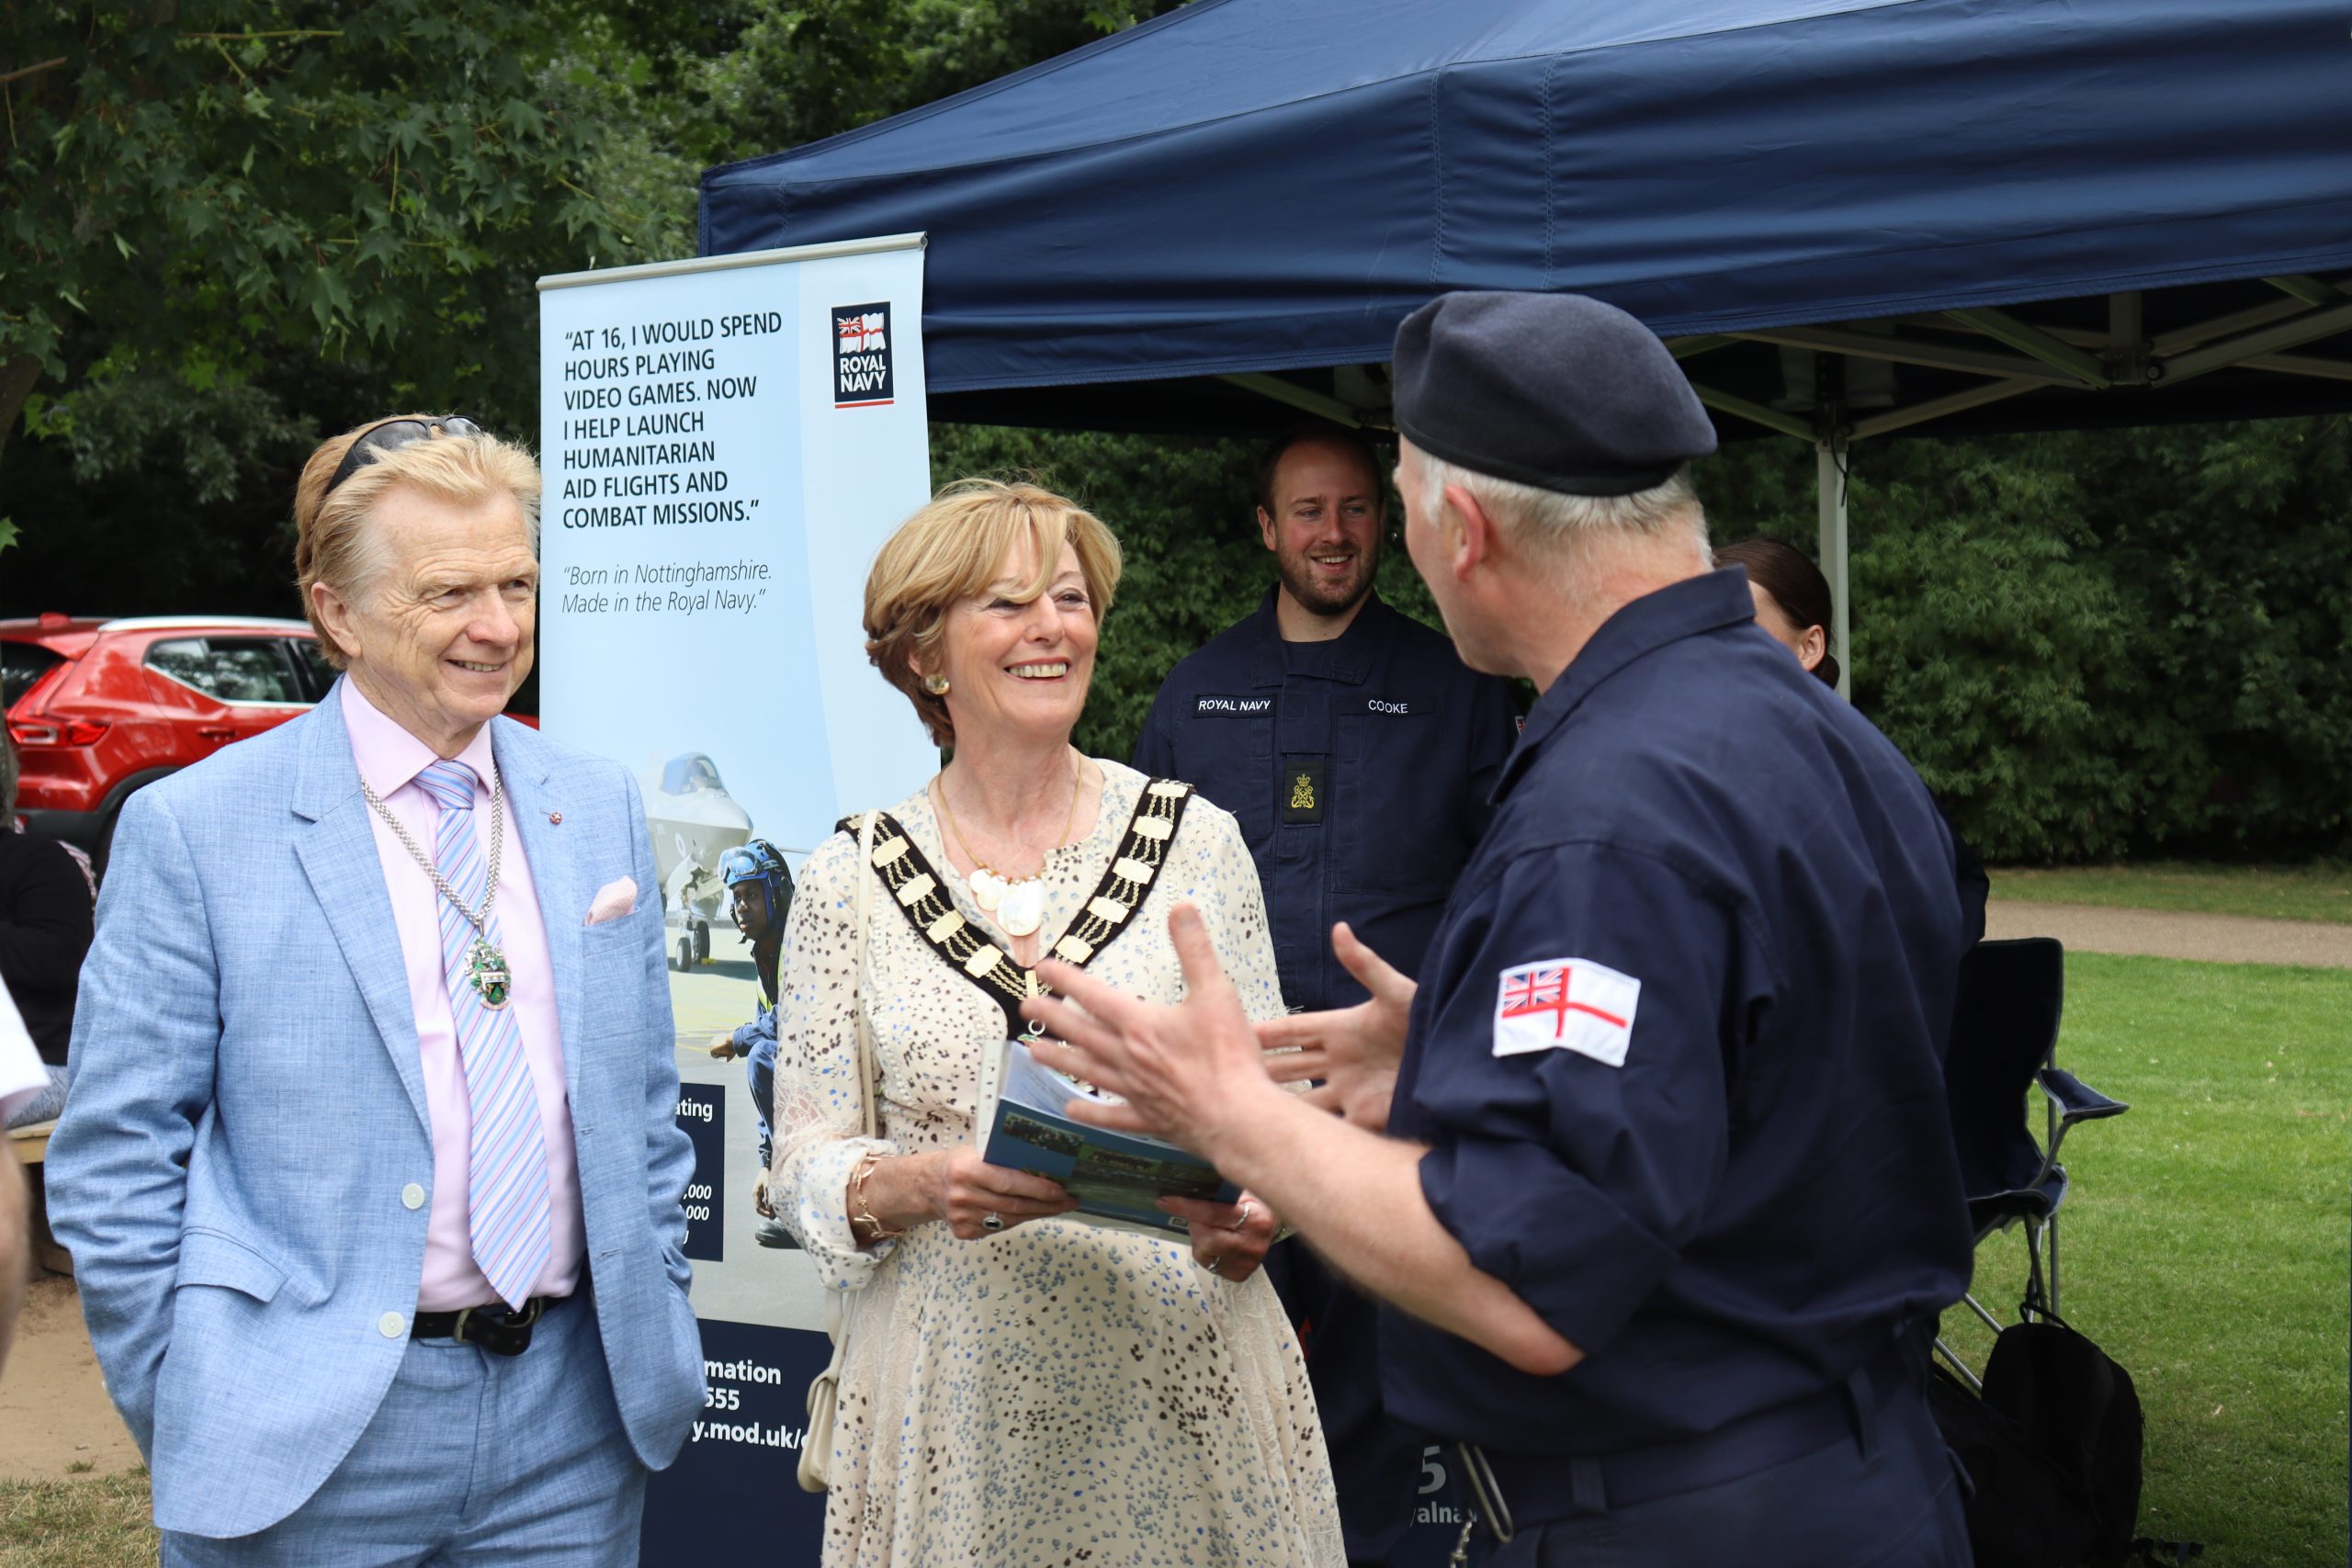 Consort Cllr Neil Clarke and Mayor Cllr Tina Combellack chatted withe local armed forces representatives scaled